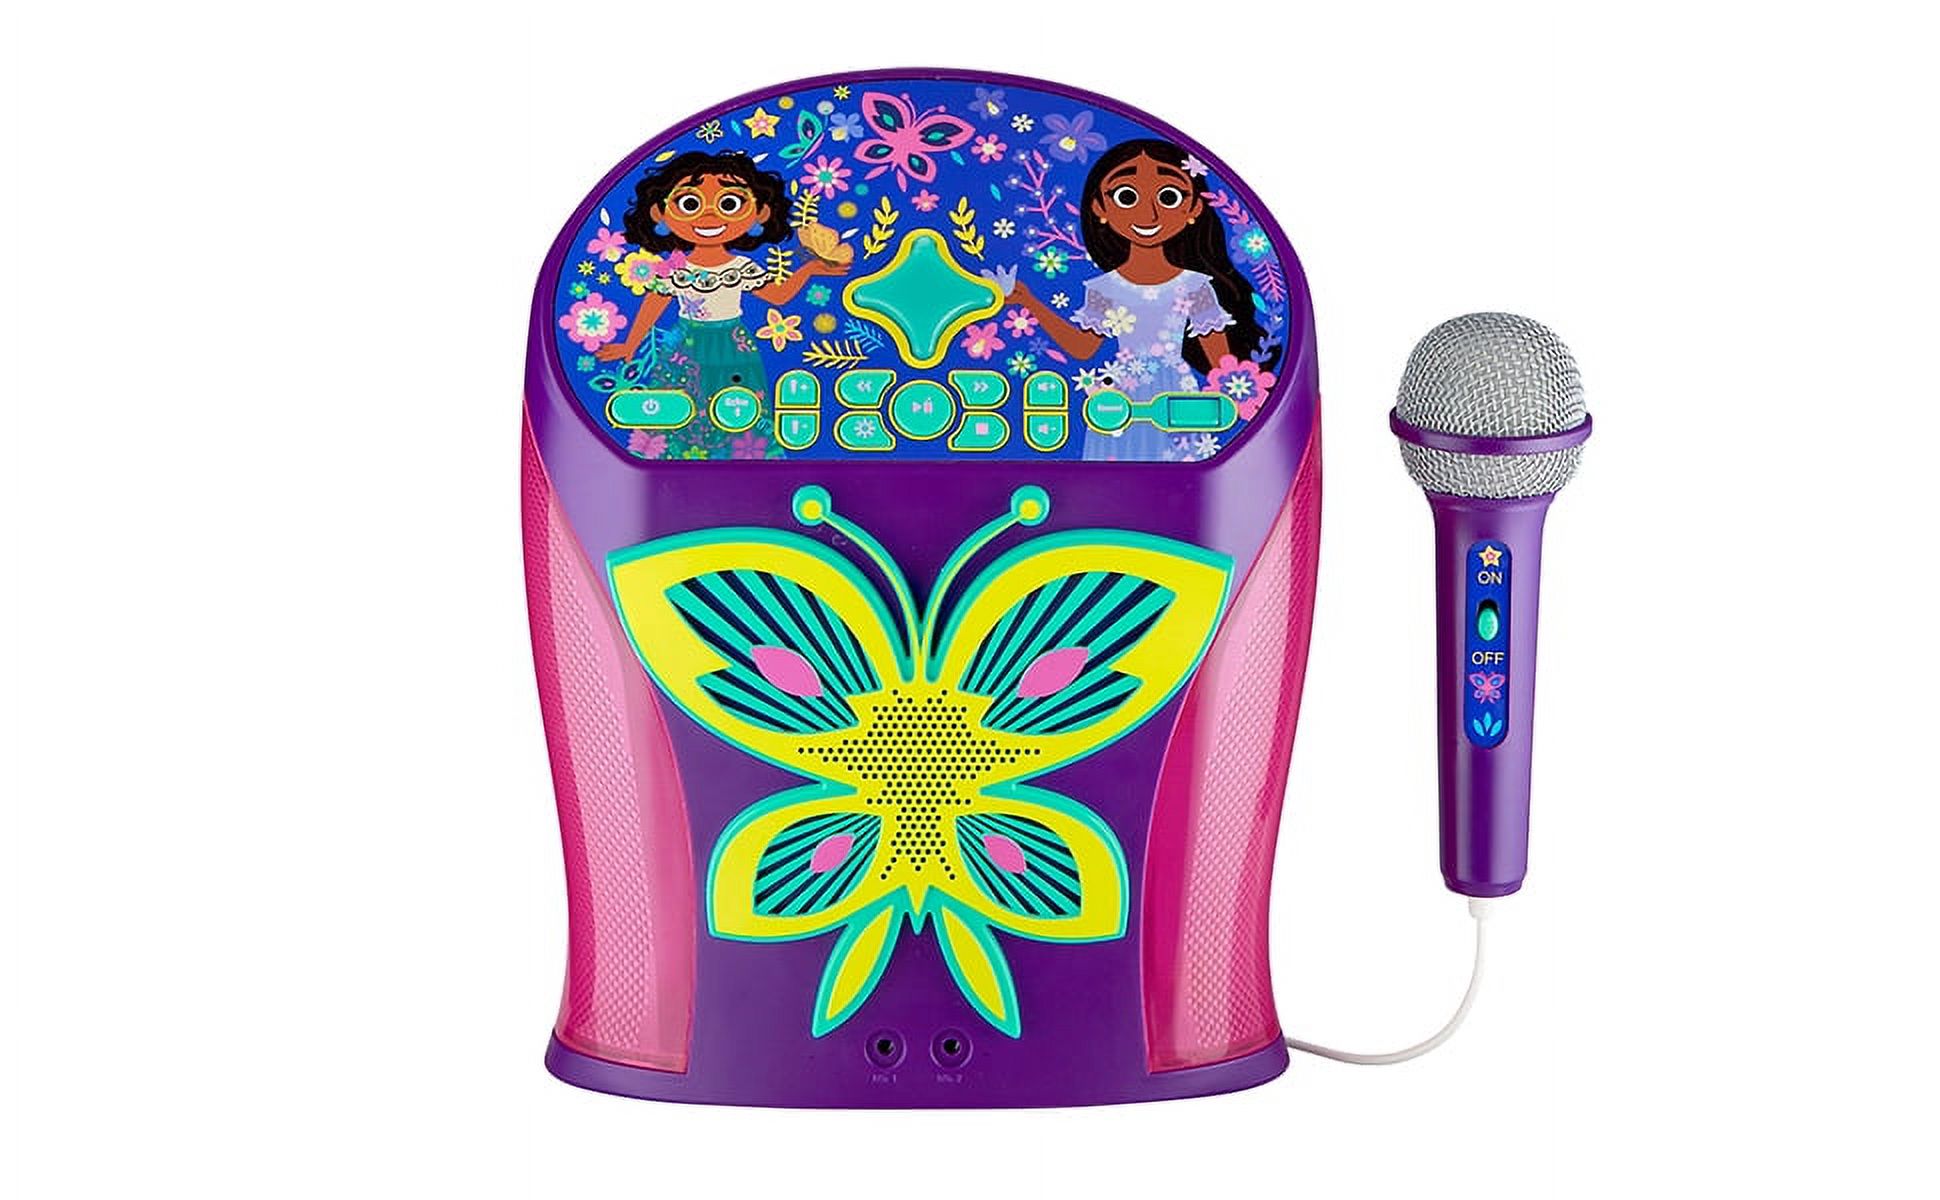 Disney Encanto Bluetooth Karaoke with EZ Link Technology. USB Expansion Port to Store / Record. - image 1 of 8